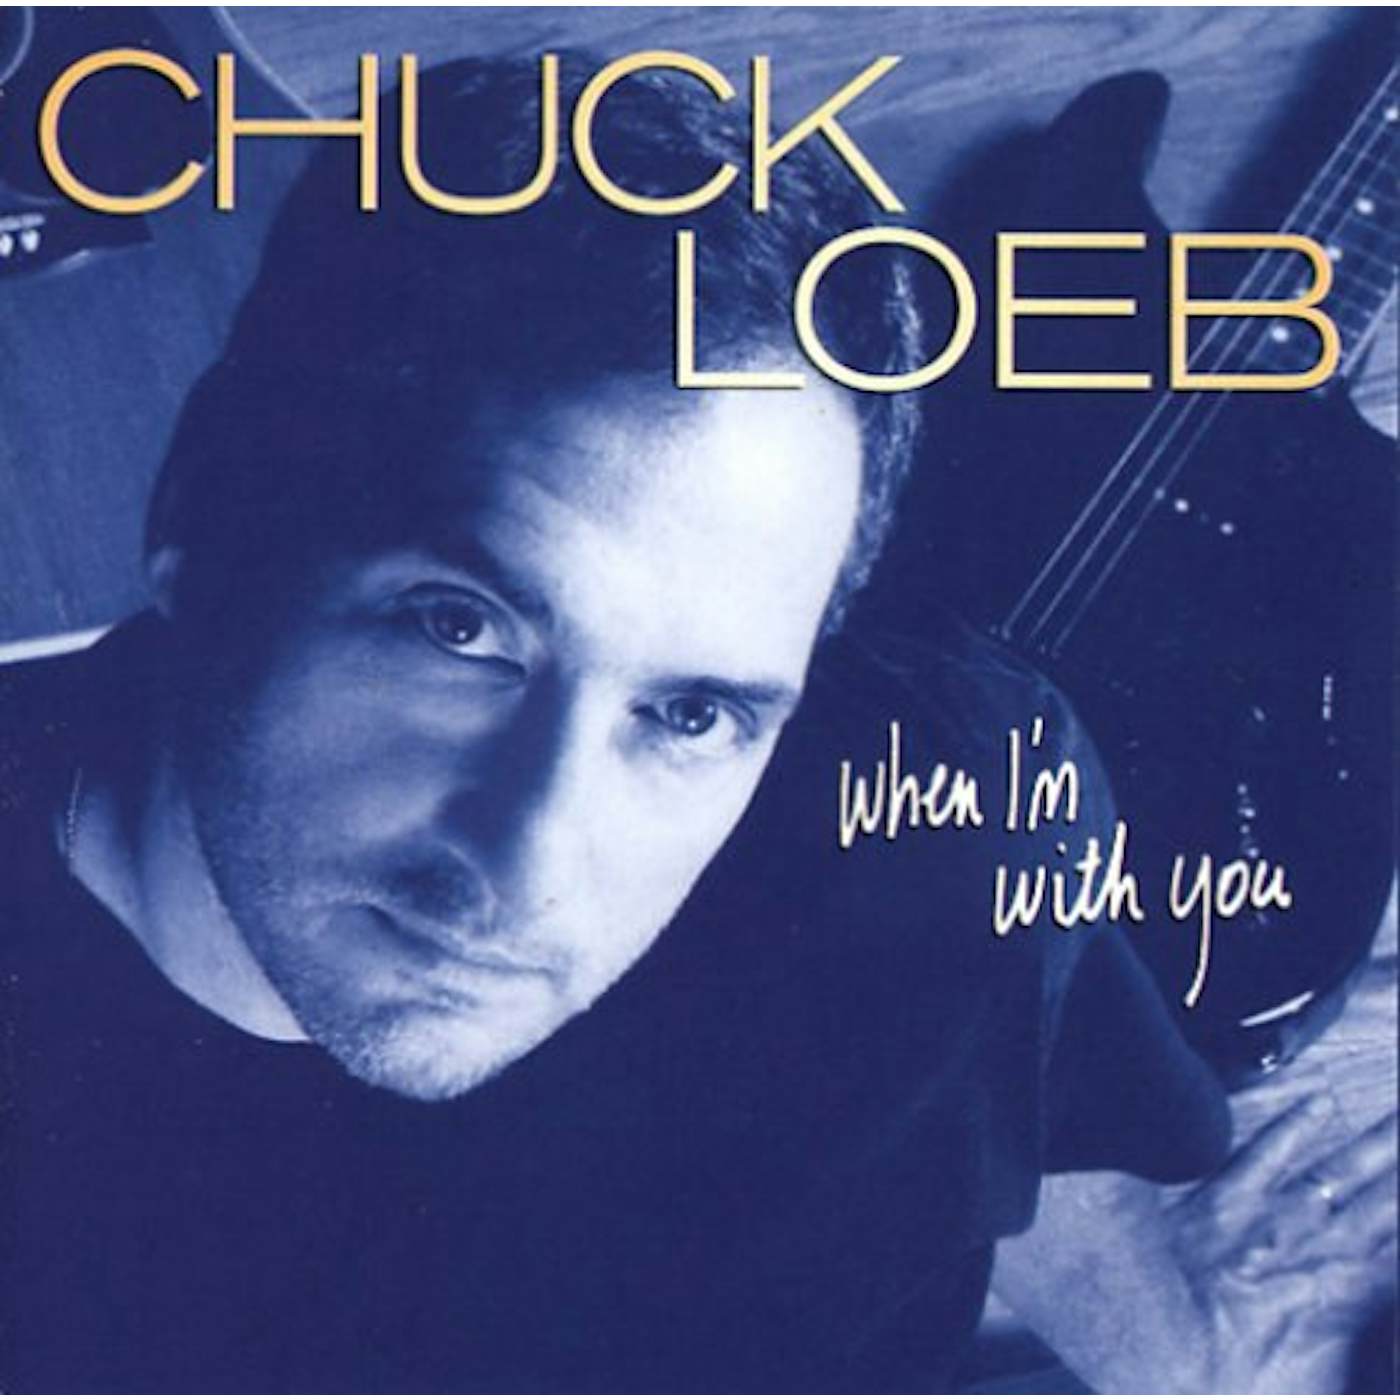 Chuck Loeb WHEN I'M WITH YOU CD